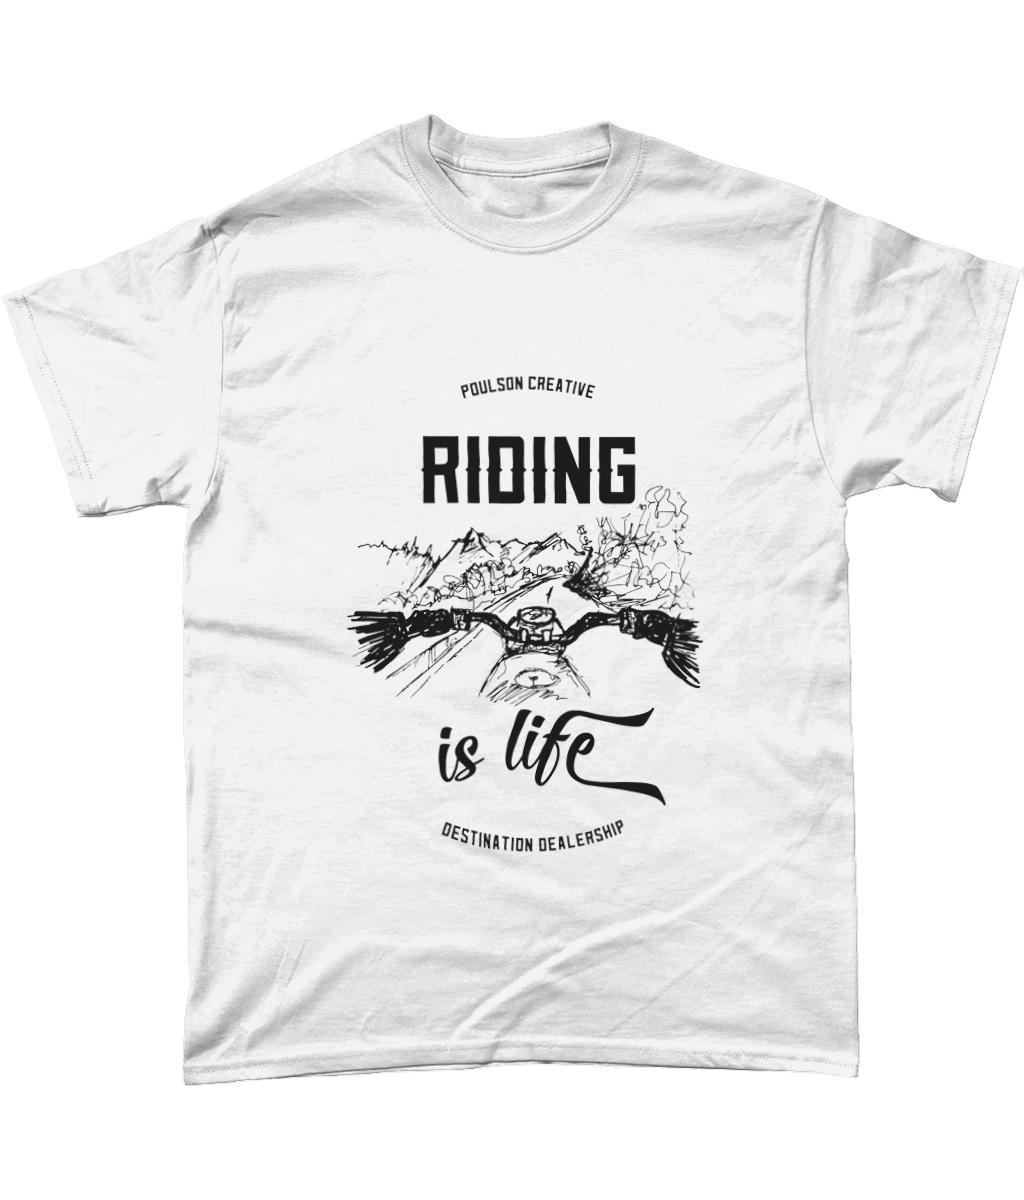 Poulson Creative - Riding Is Life T-Shirt